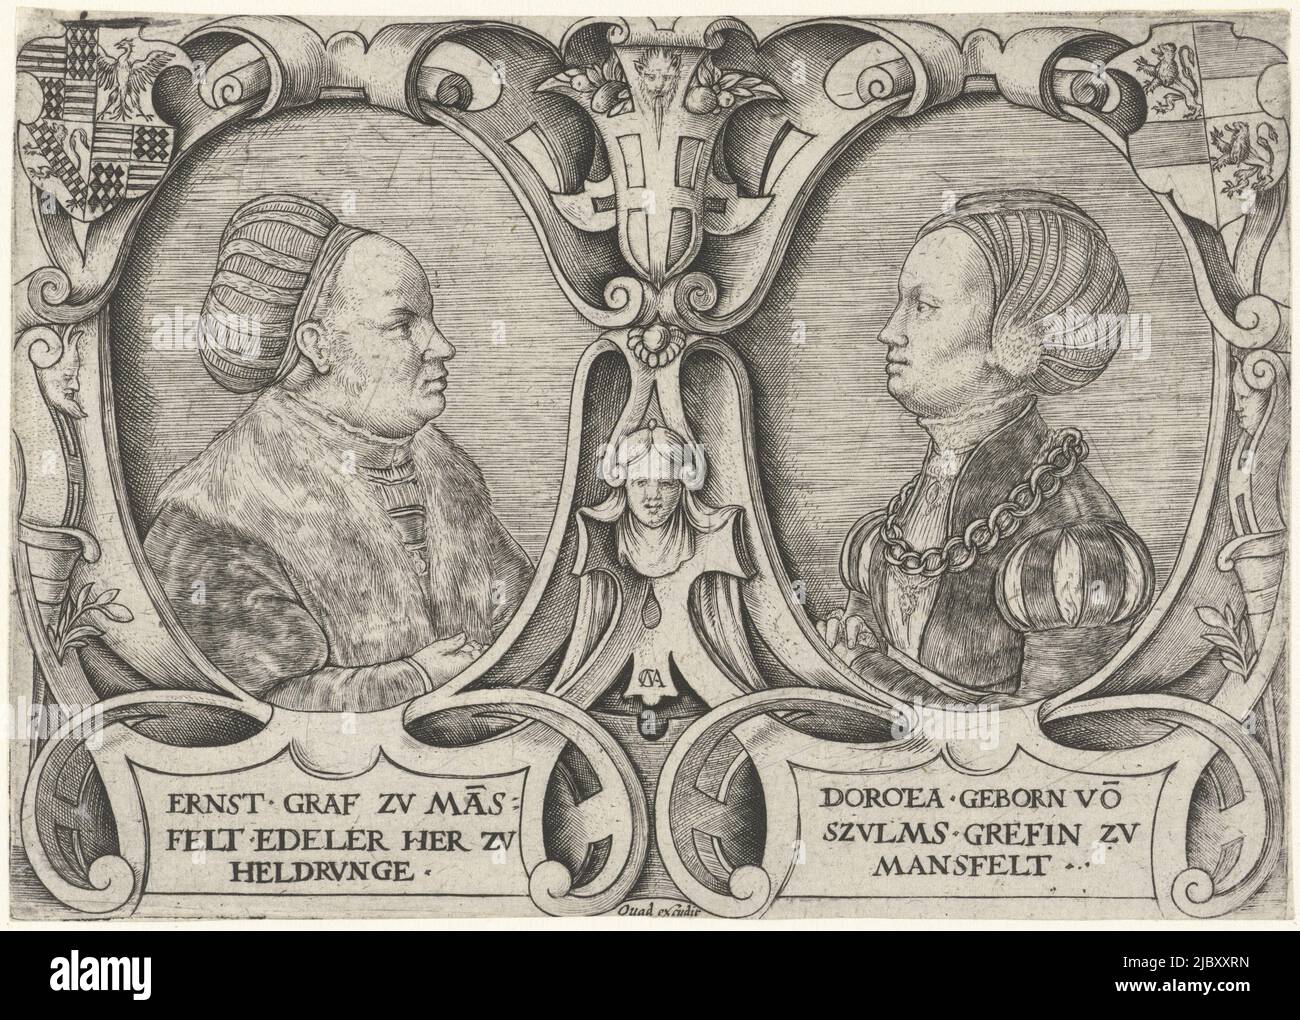 Double portrait of Count Ernst II Mansfeld zu Vorderort and of his second wife Dorothea von Solms-Lich, both en profil. In the upper left and right corners of the ornamental frame their personal coats of arms., Double portrait of Count Ernst II Mansfeld zu Vorderort and of his wife Dorothea von Solms-Lich, print maker: Cornelis Massijs, (mentioned on object), publisher: Quad, (mentioned on object), Antwerp, c. 1550, paper, engraving, h 121 mm × w 170 mm Stock Photo